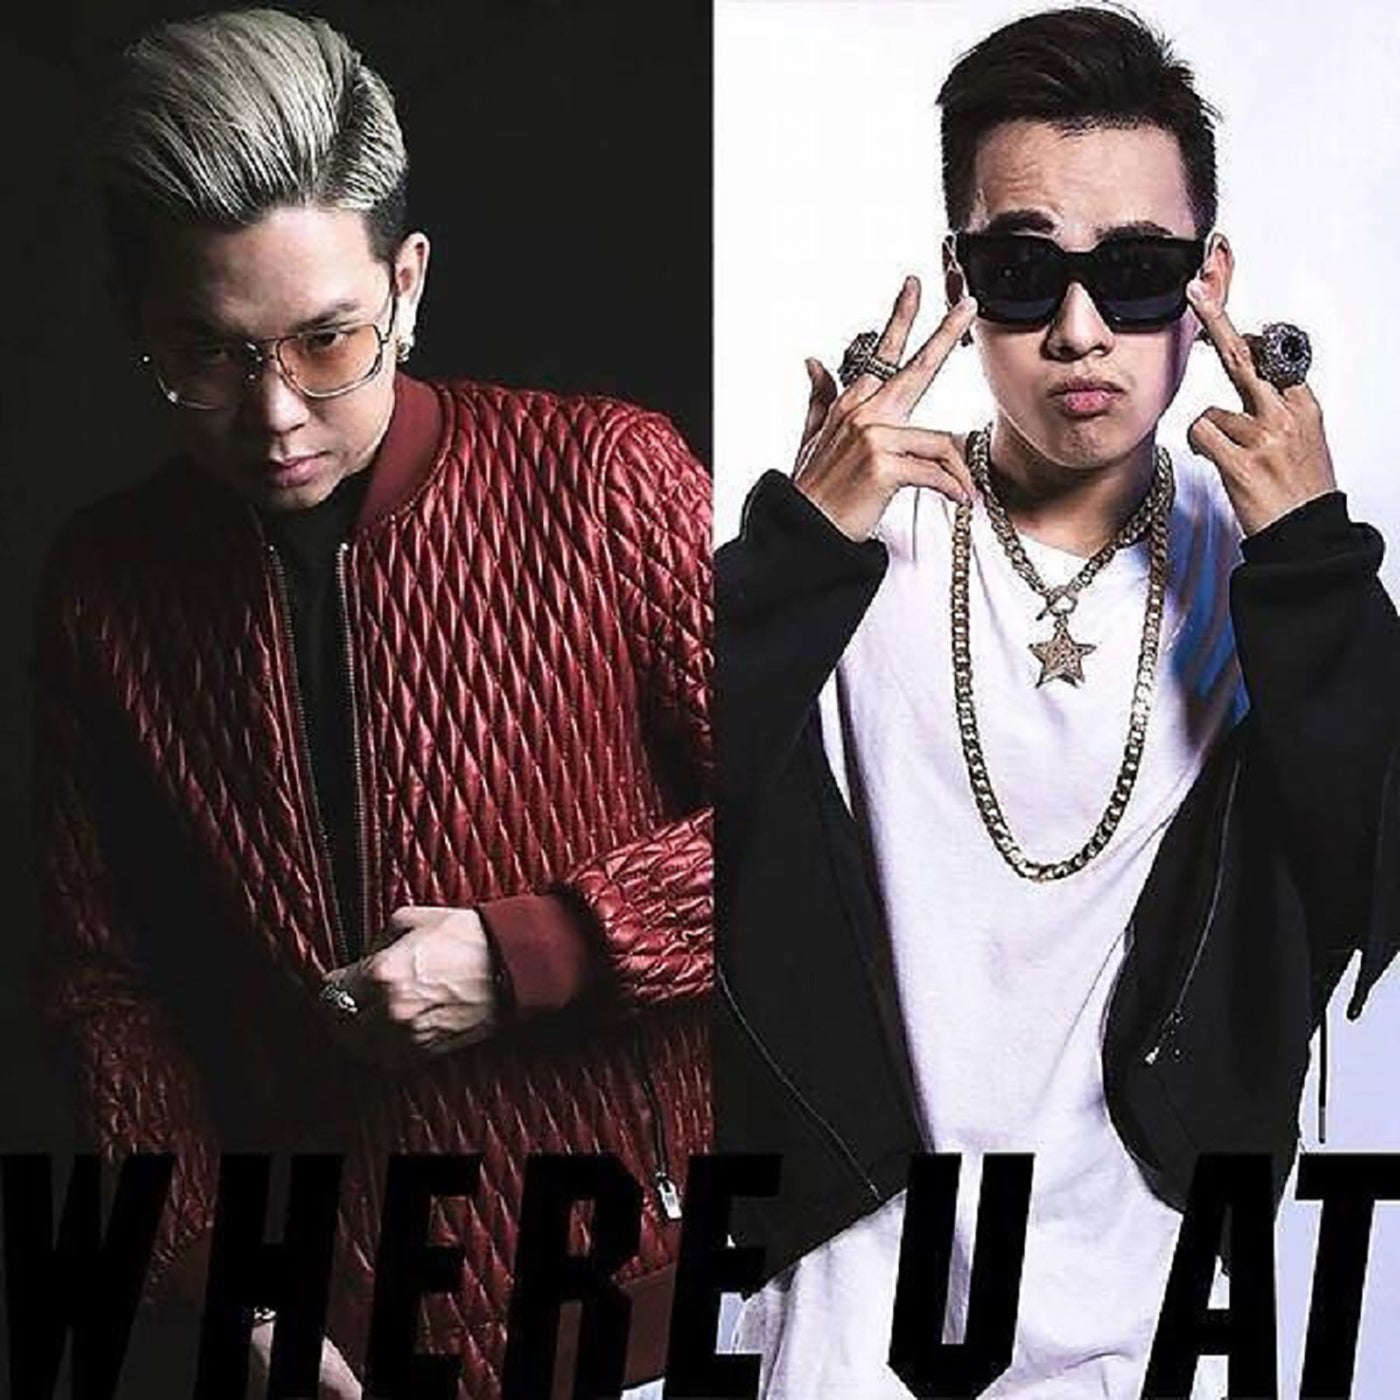 Where U At (feat. Andree) by JC Hưng and Andree on Beatsource